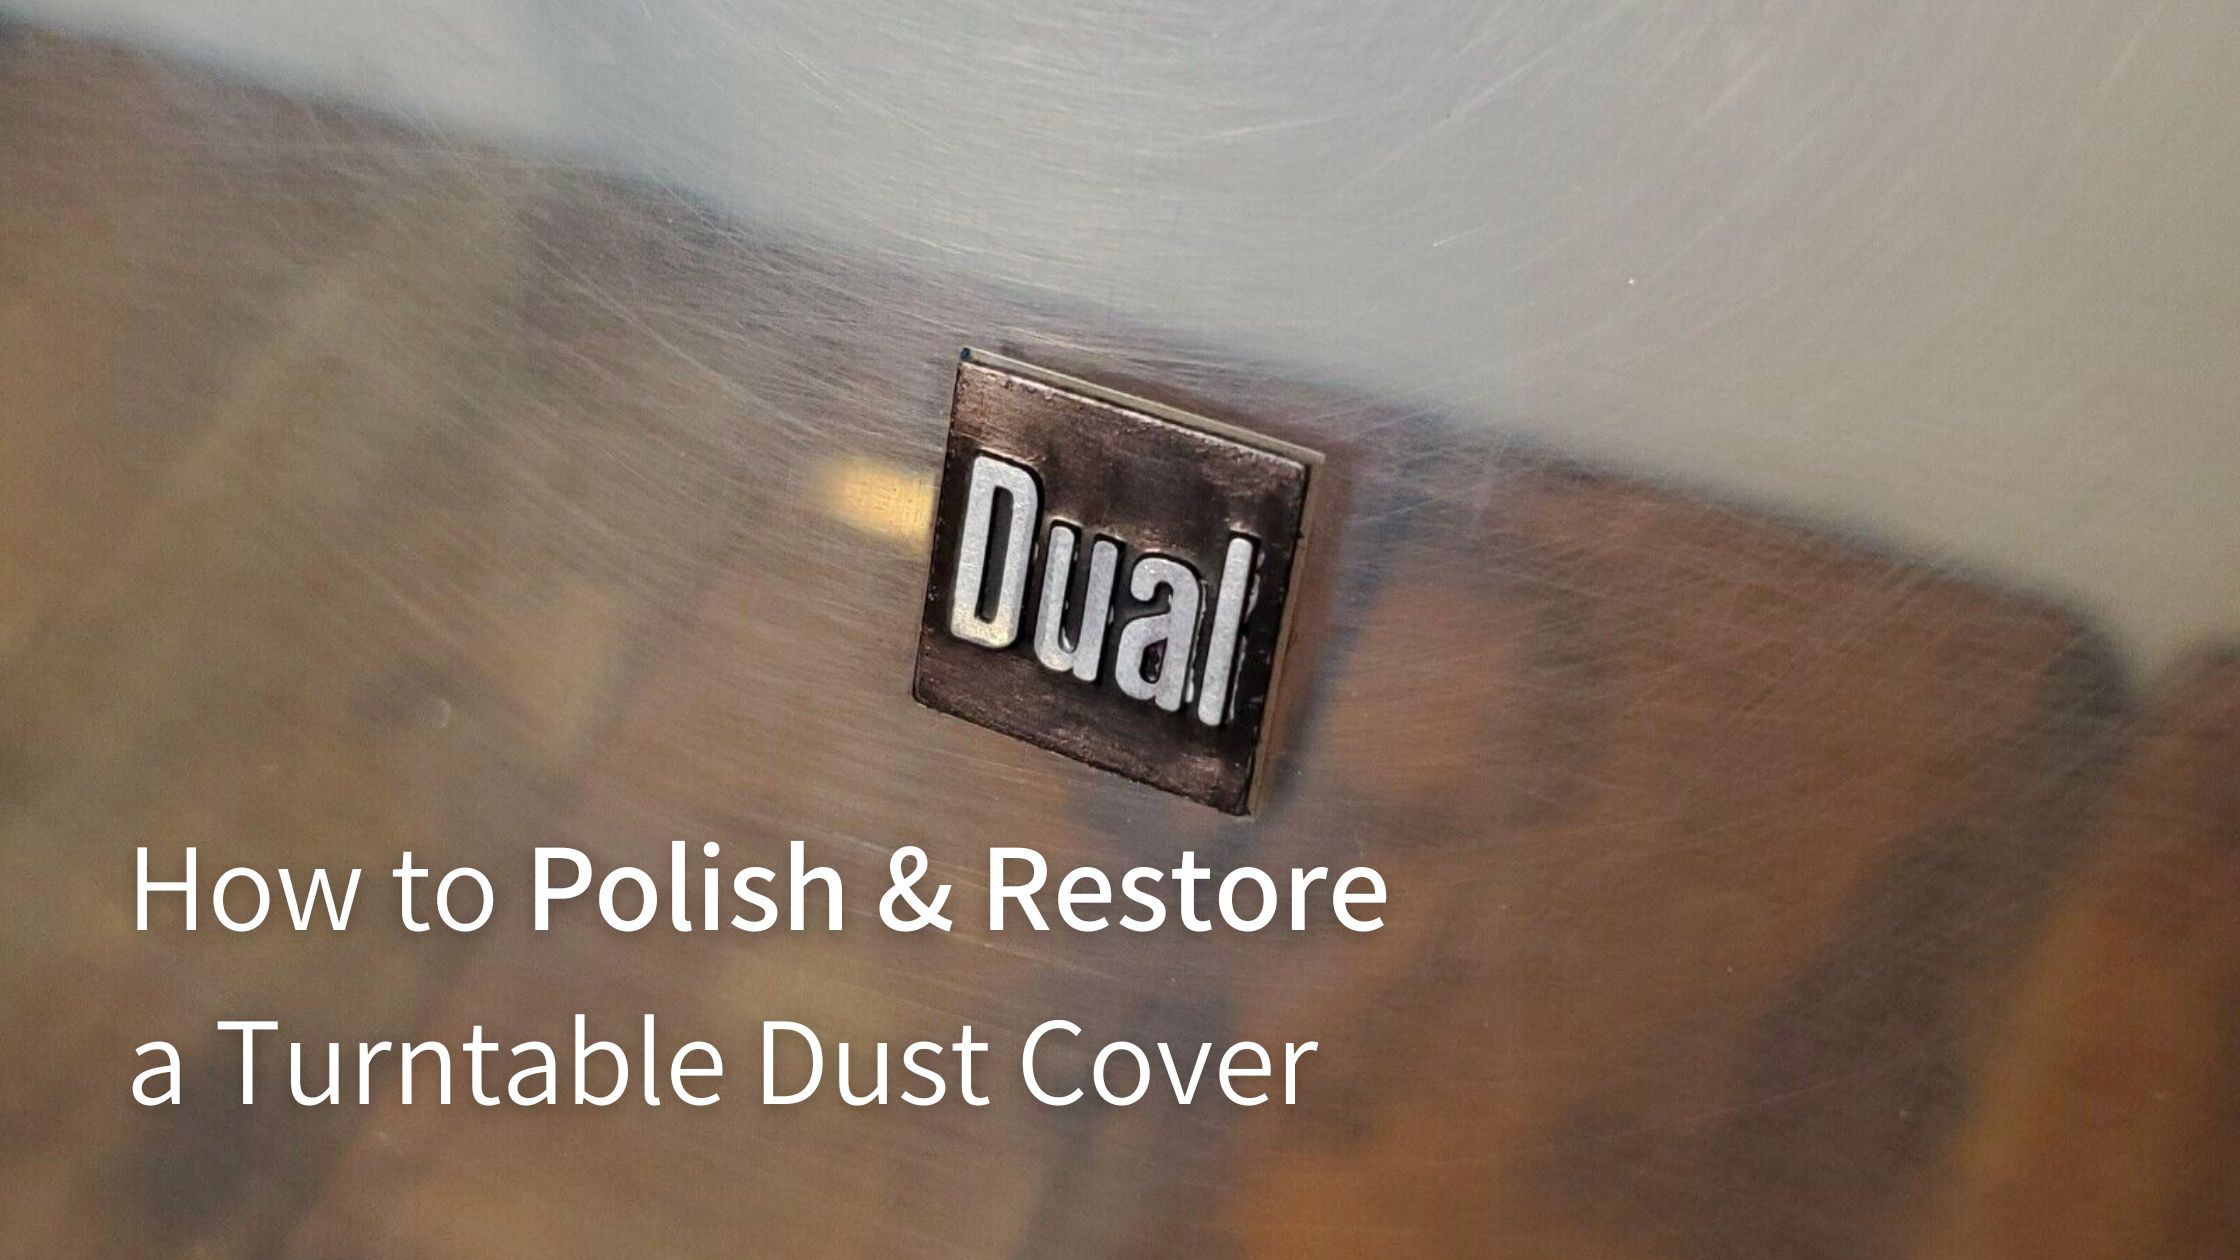 How to polish turntable dust cover